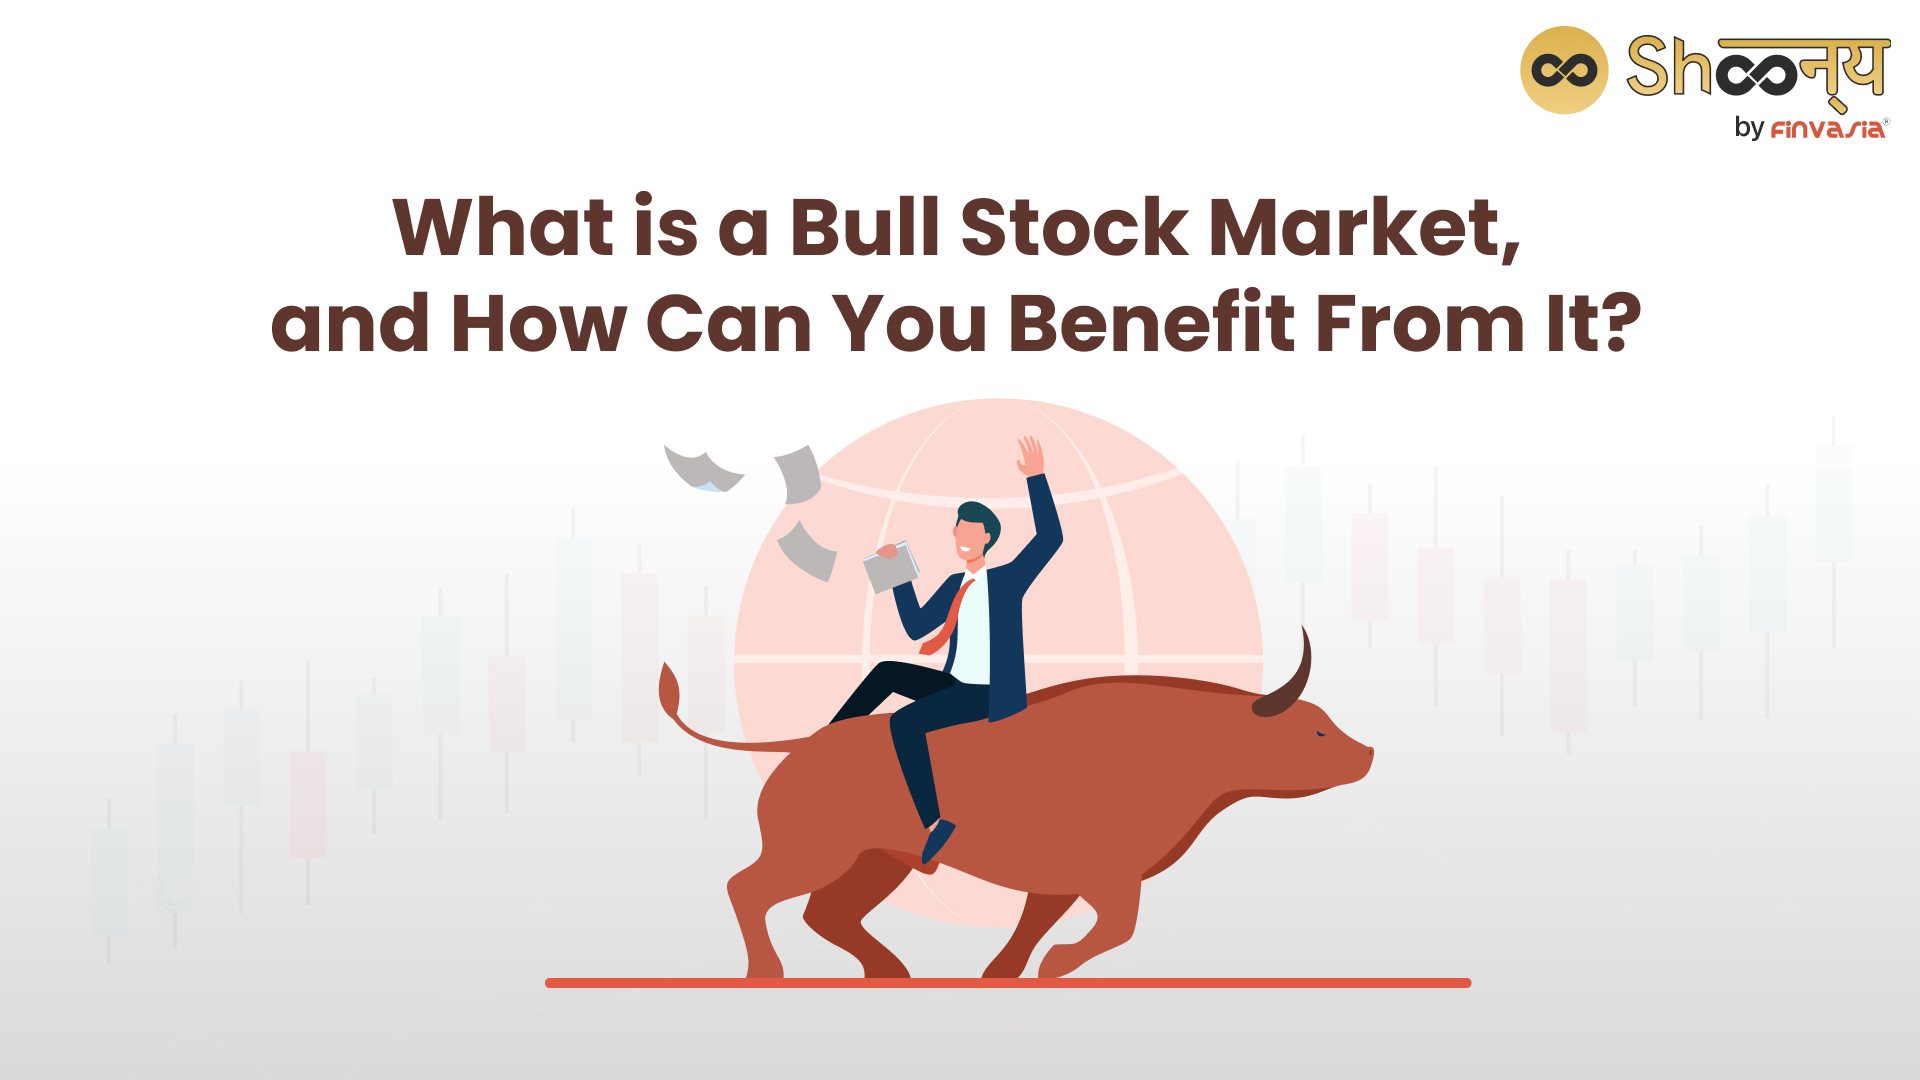 
  Bull Stock Market | Meaning, Advantages and Disadvantages